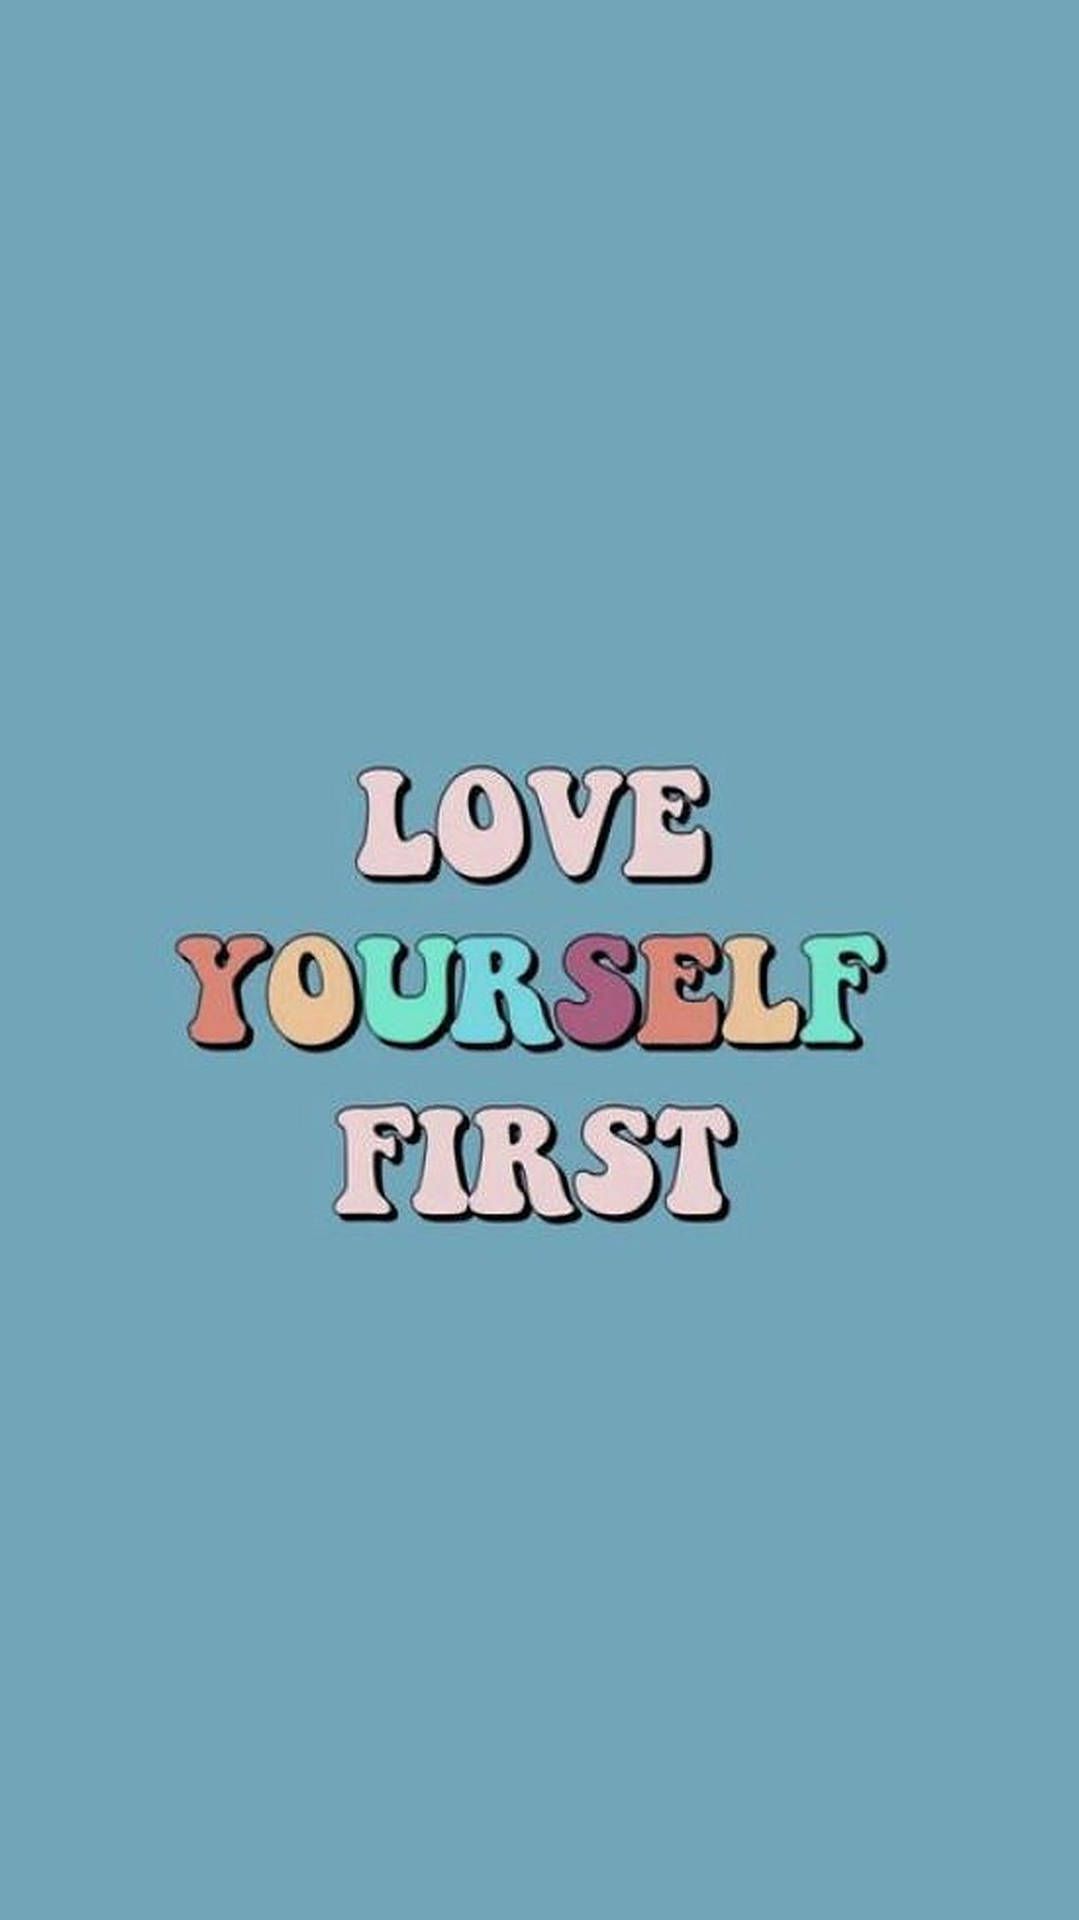 Love yourself first, written in colorful letters, on a blue background - Preppy, cool, couple